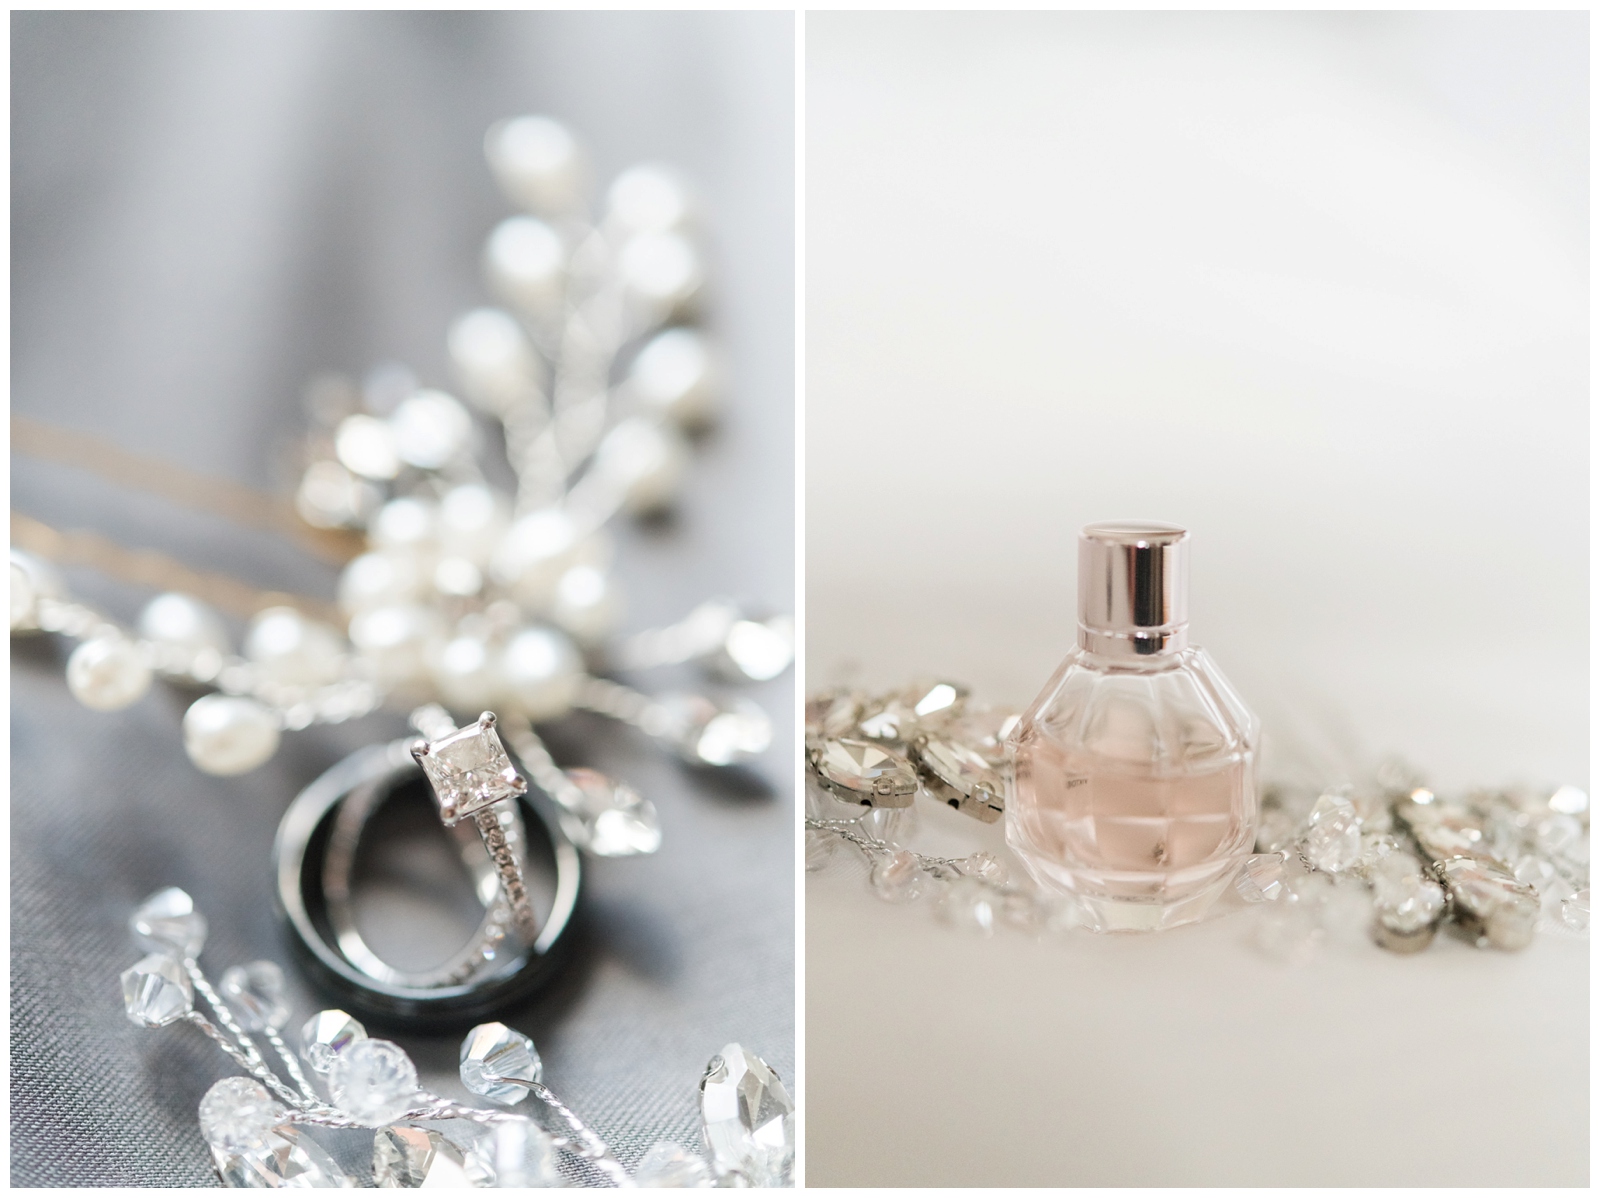 wedding bands stacked by bride's hairpiece and bride's bottle of perfume photographed for Ohio wedding